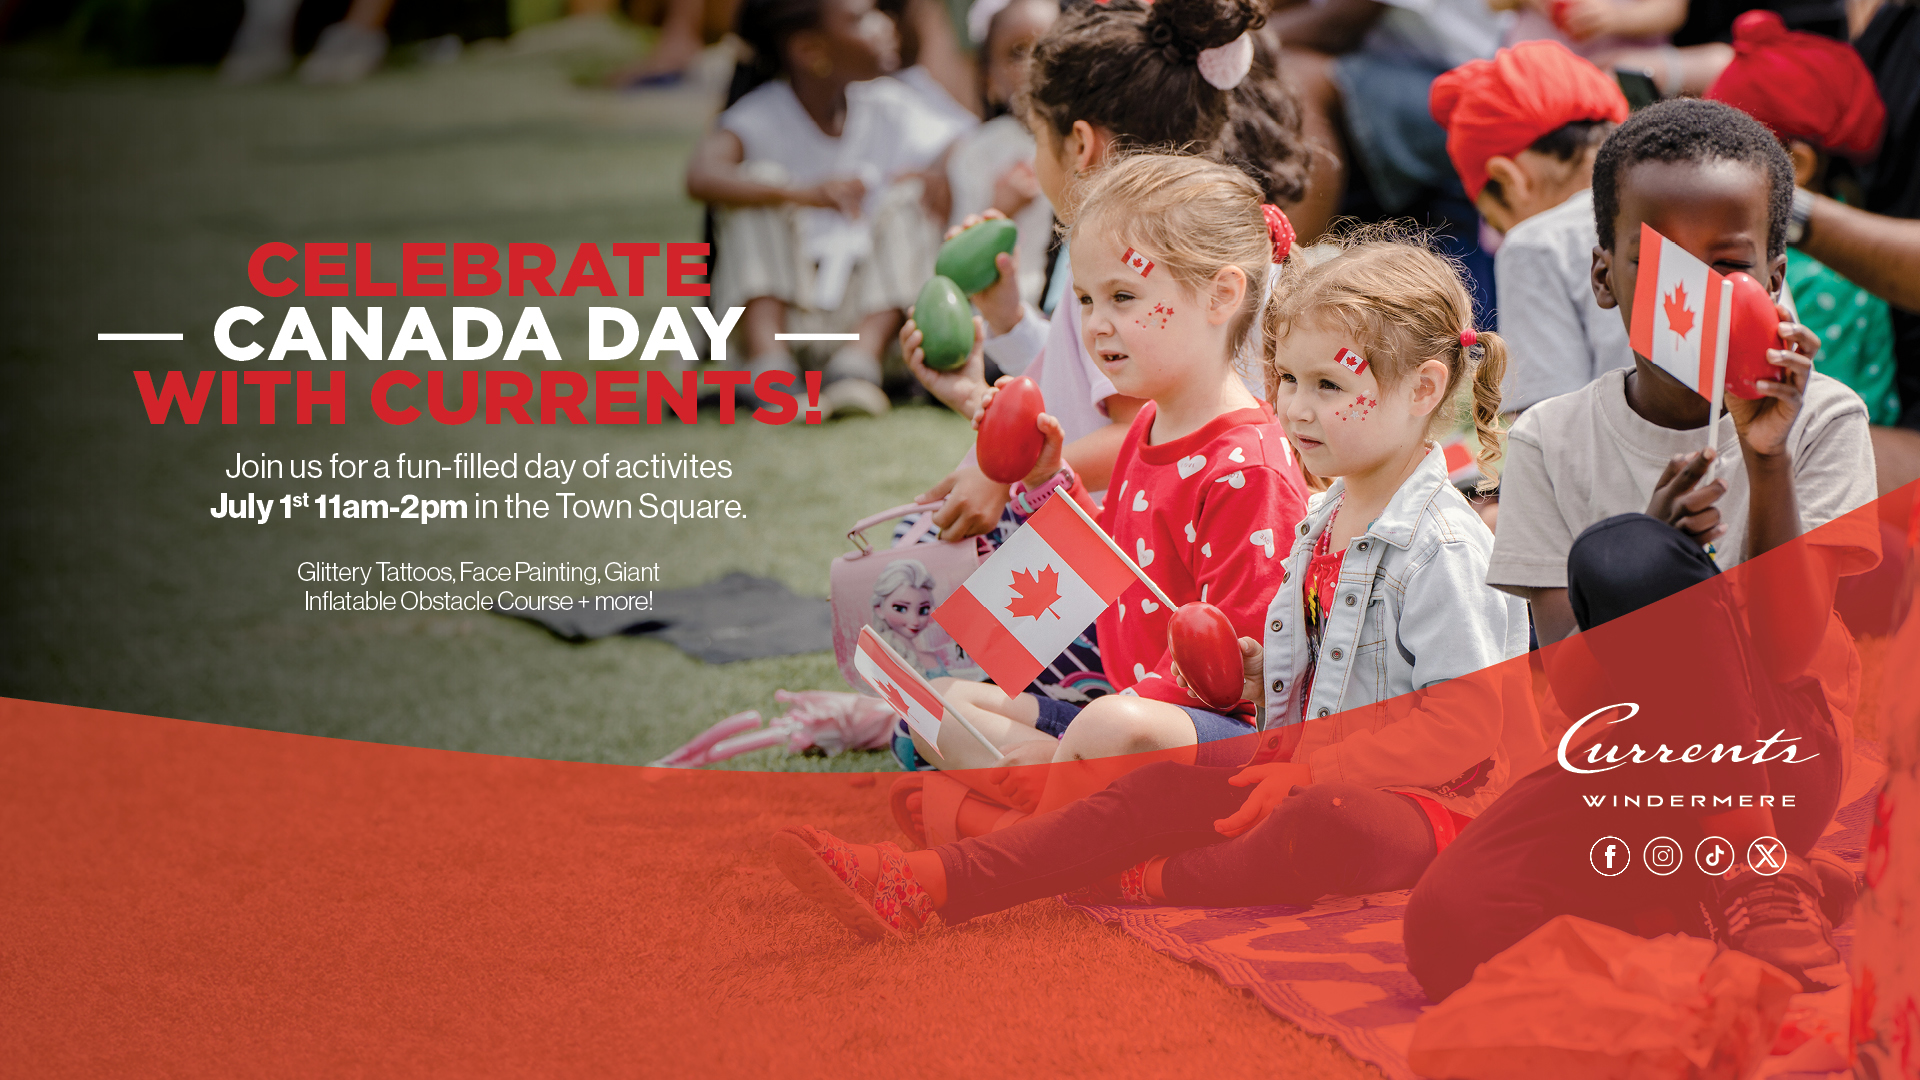 Canada Day at Currents